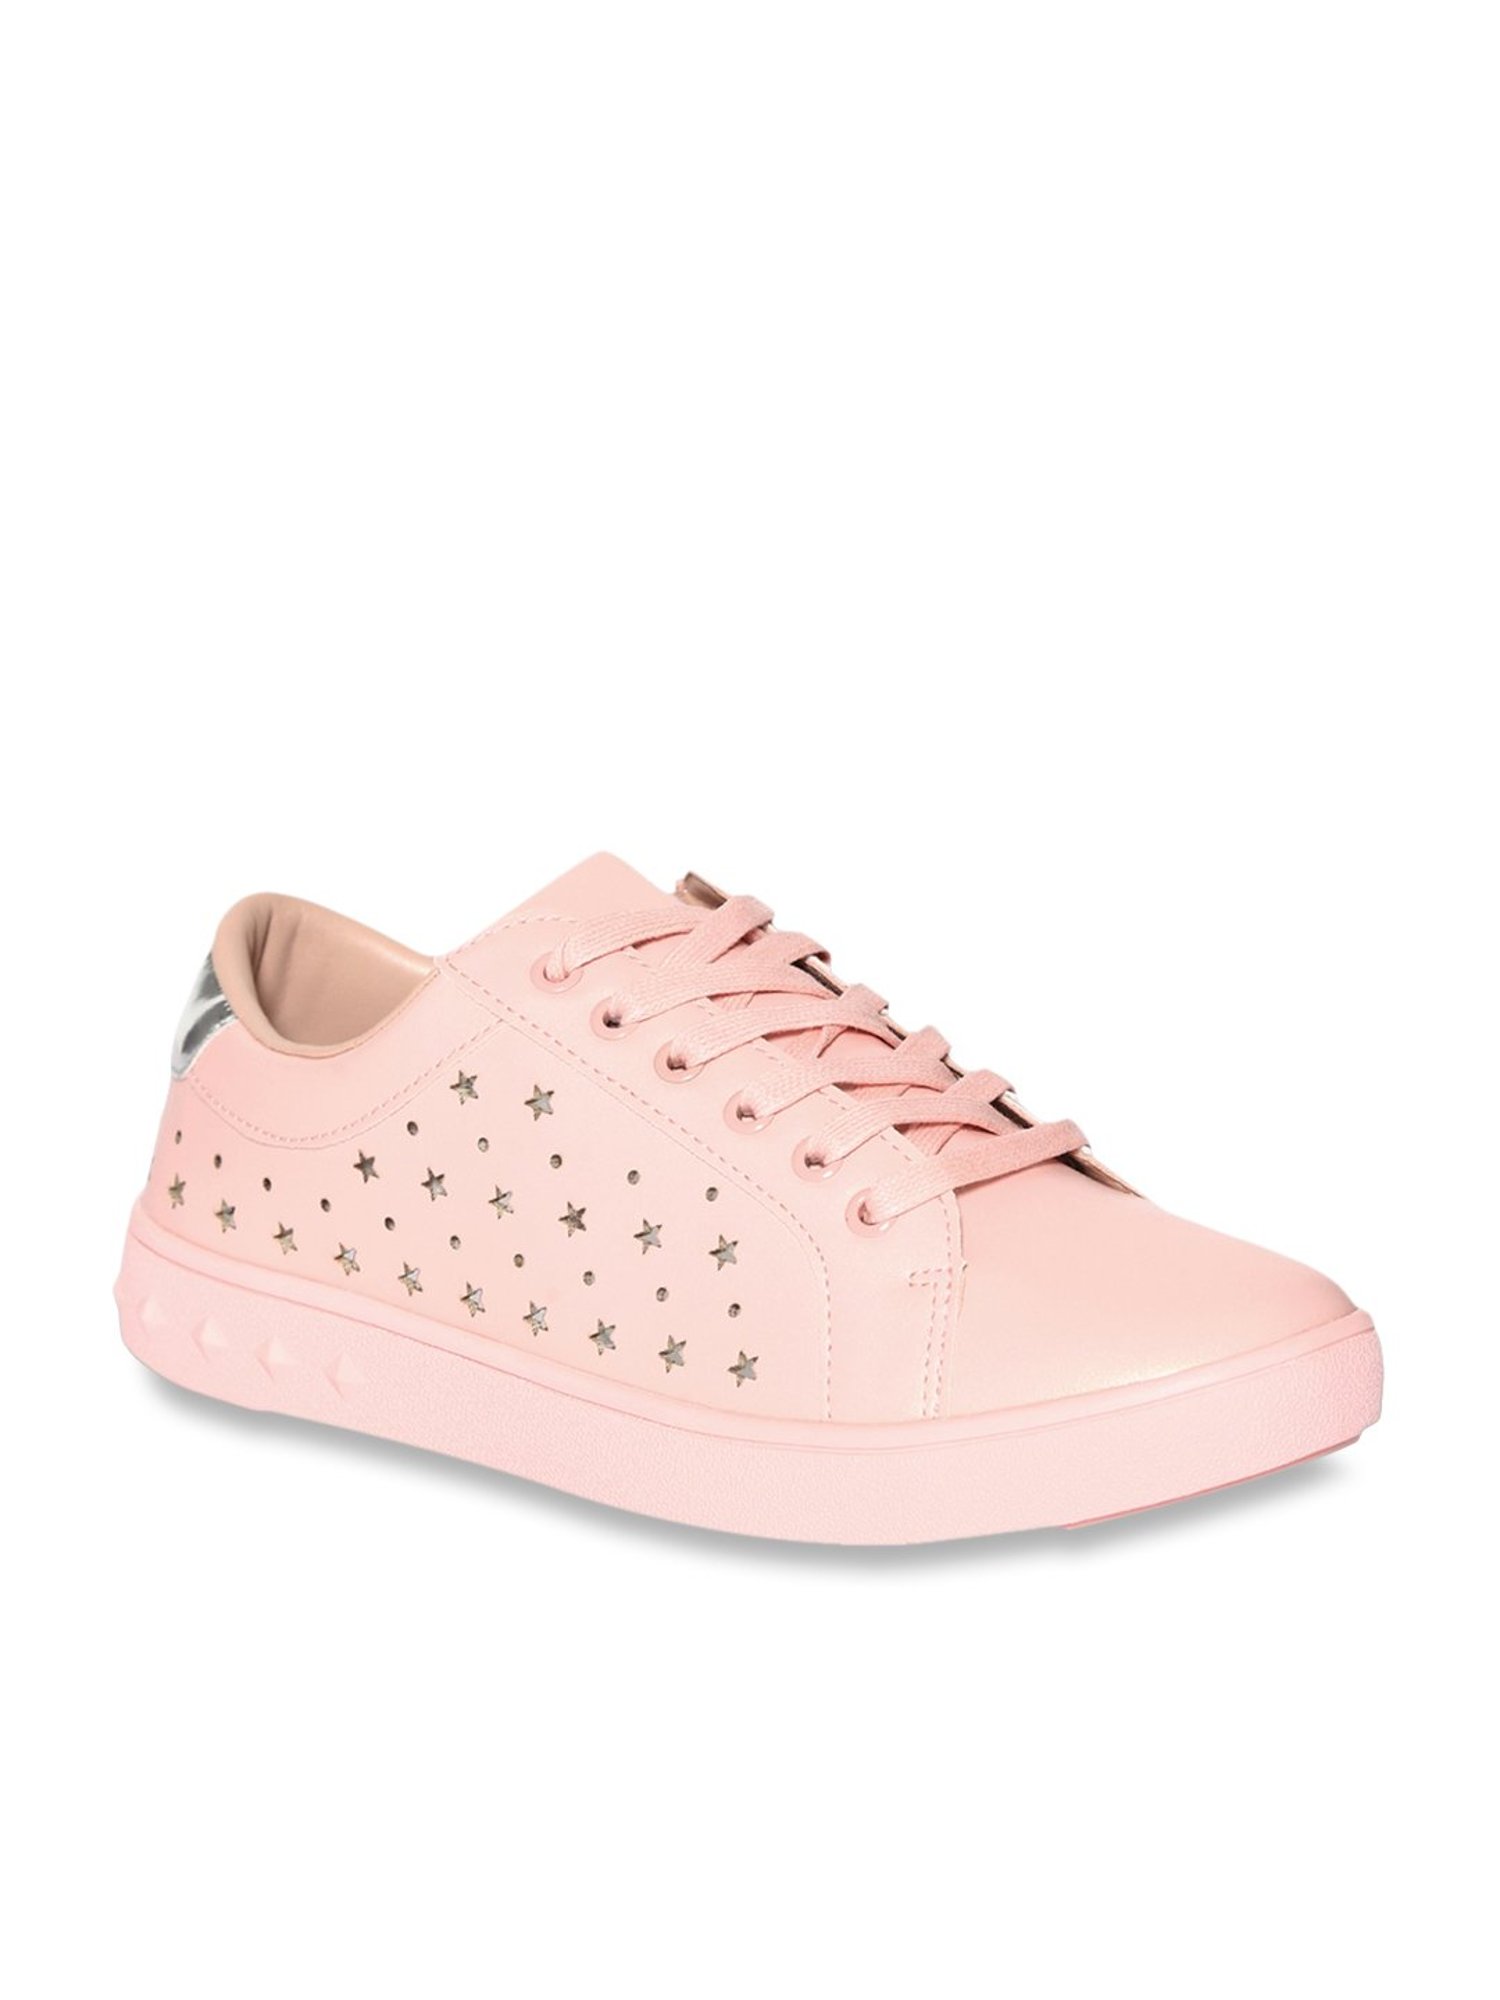 Buy Stride Shawn Blush Pink Sneakers 